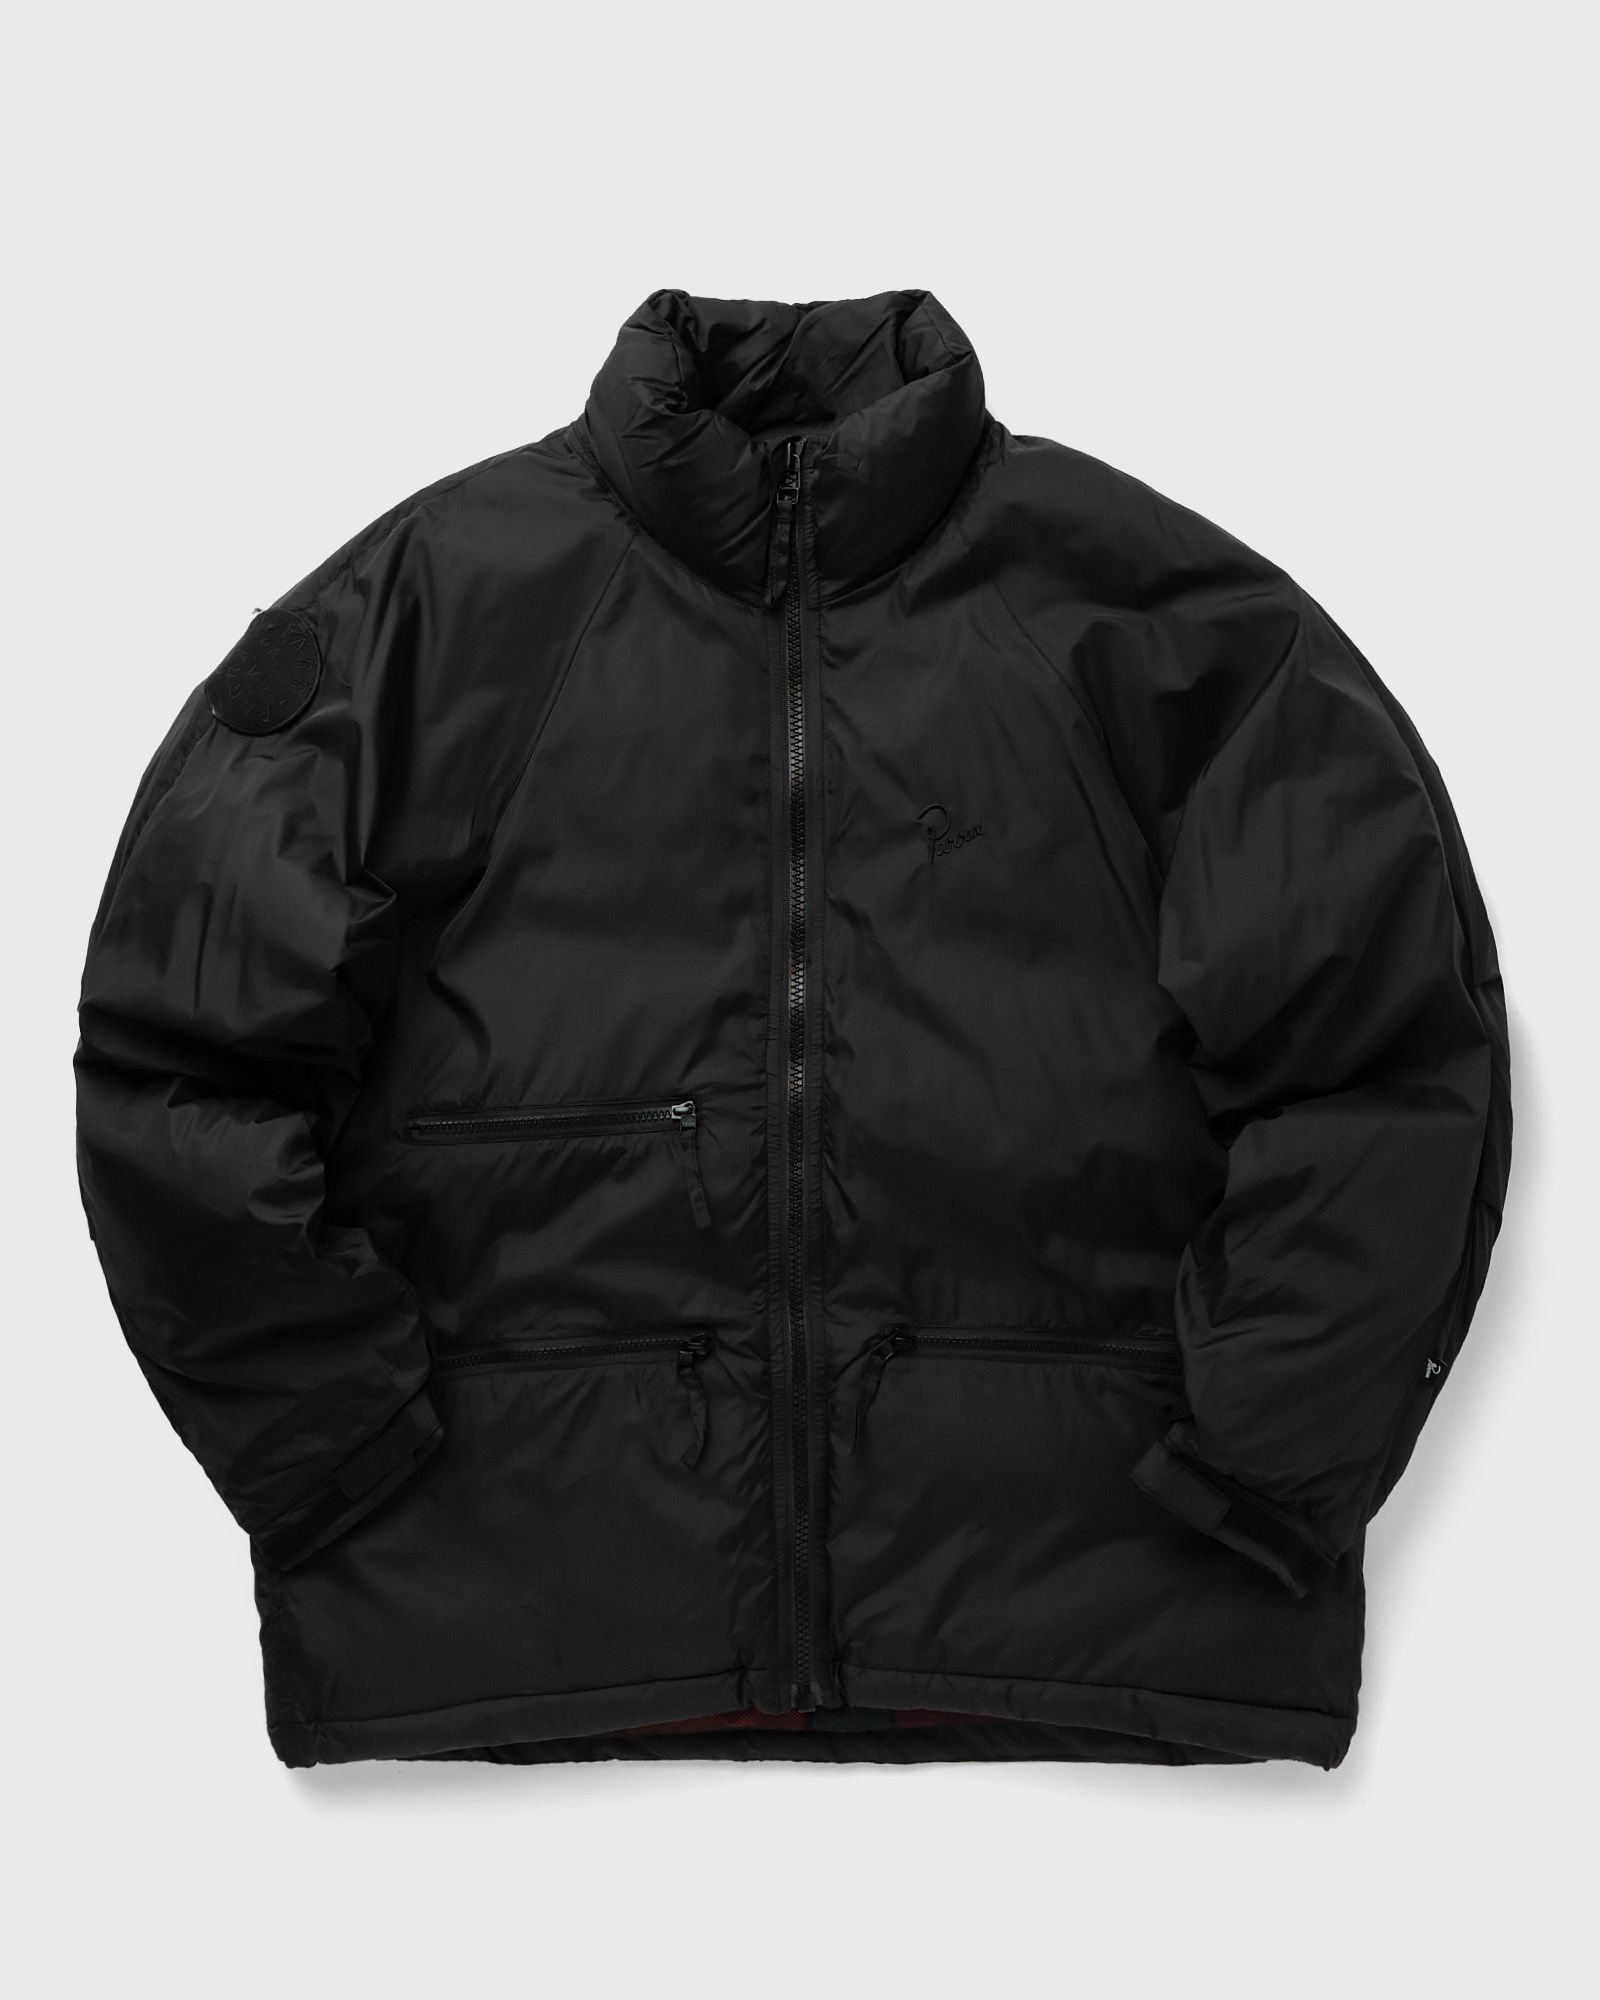 By Parra - canyons all over jacket men down & puffer jackets black in größe:xl